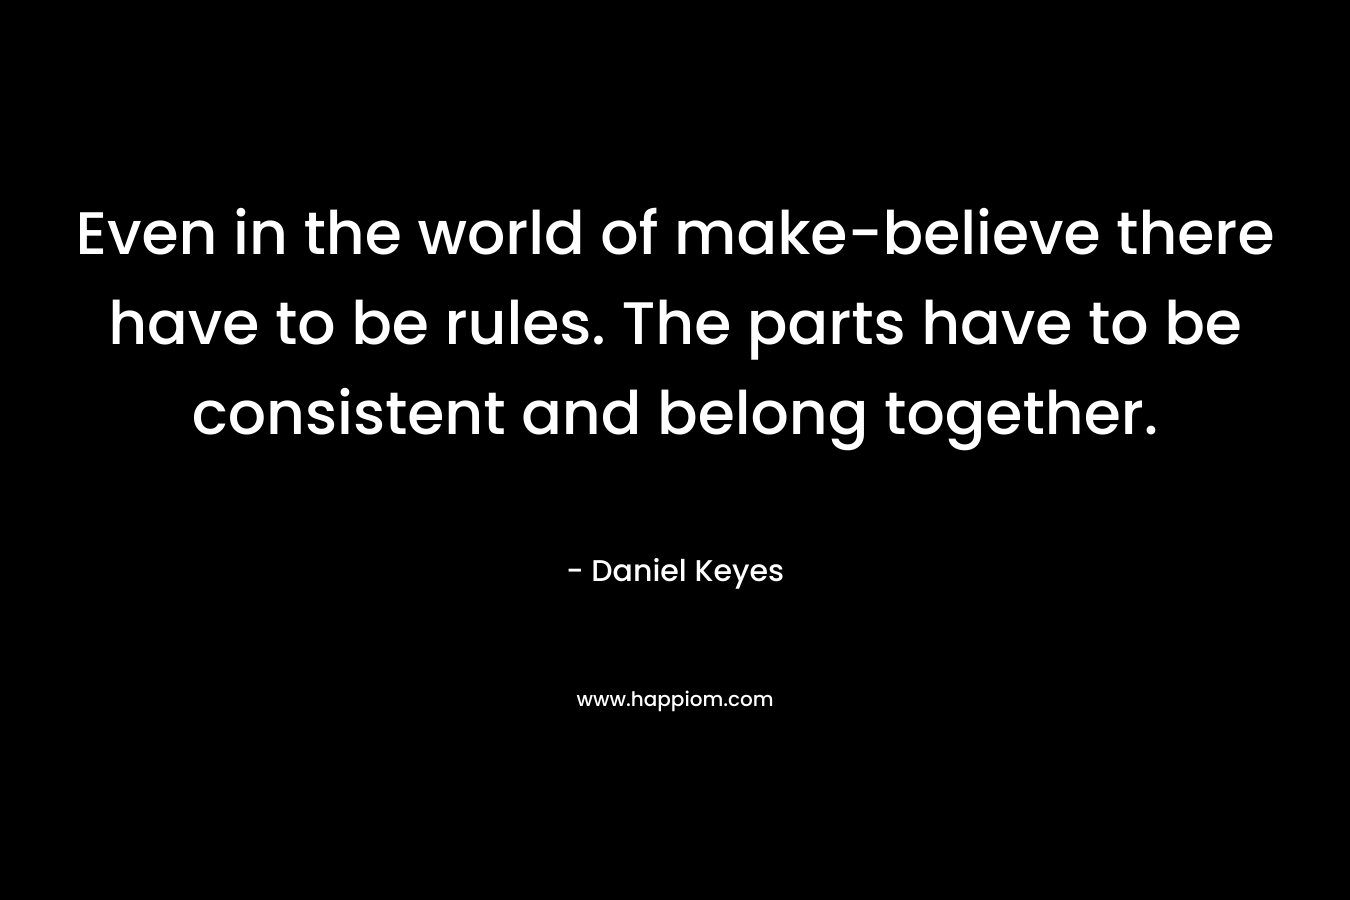 Even in the world of make-believe there have to be rules. The parts have to be consistent and belong together.